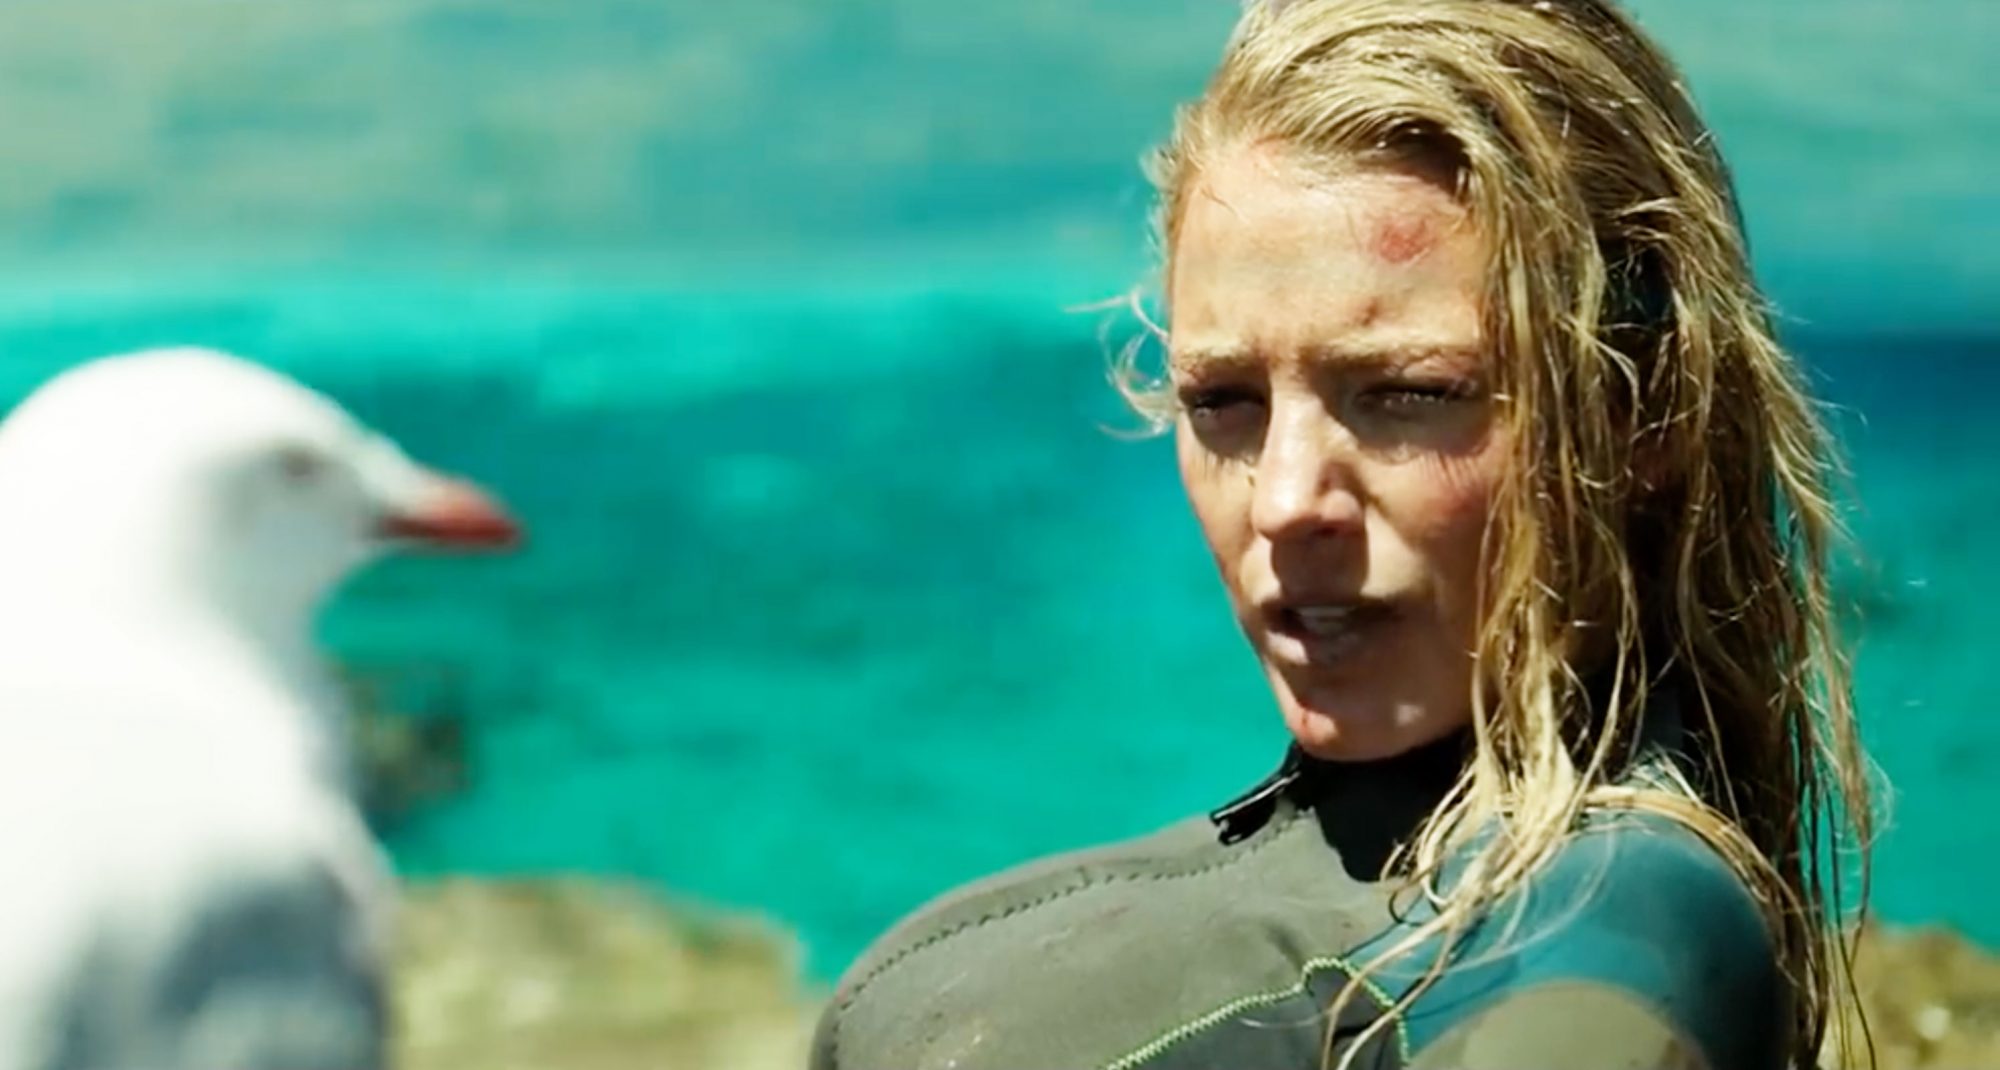 The Shallows Ending Explained